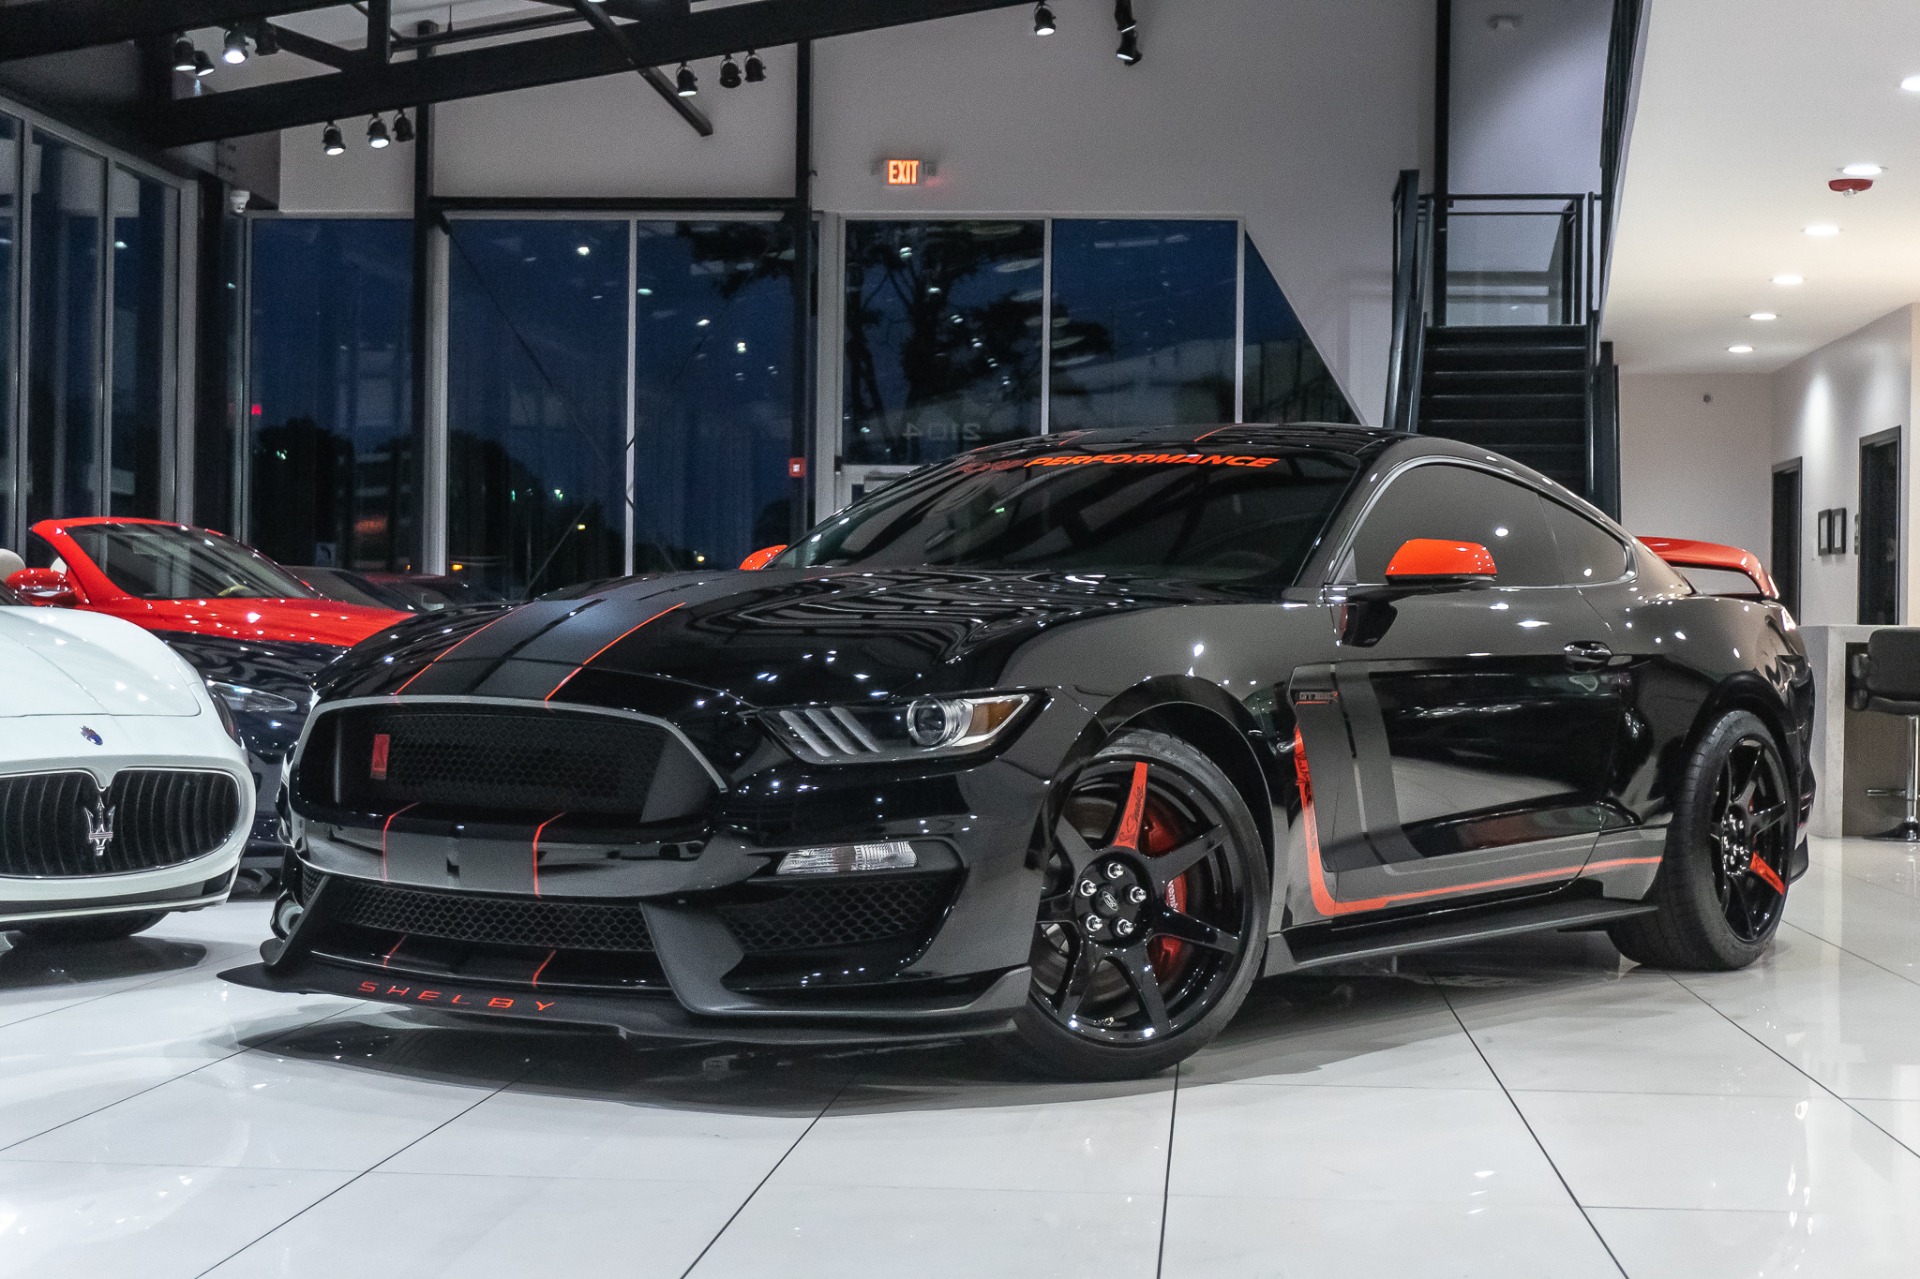 Used 2020 Ford Mustang Shelby Gt350r 6 Speed Only 1280 Miles Tech Pack Cosmetic Upgrades For 1514